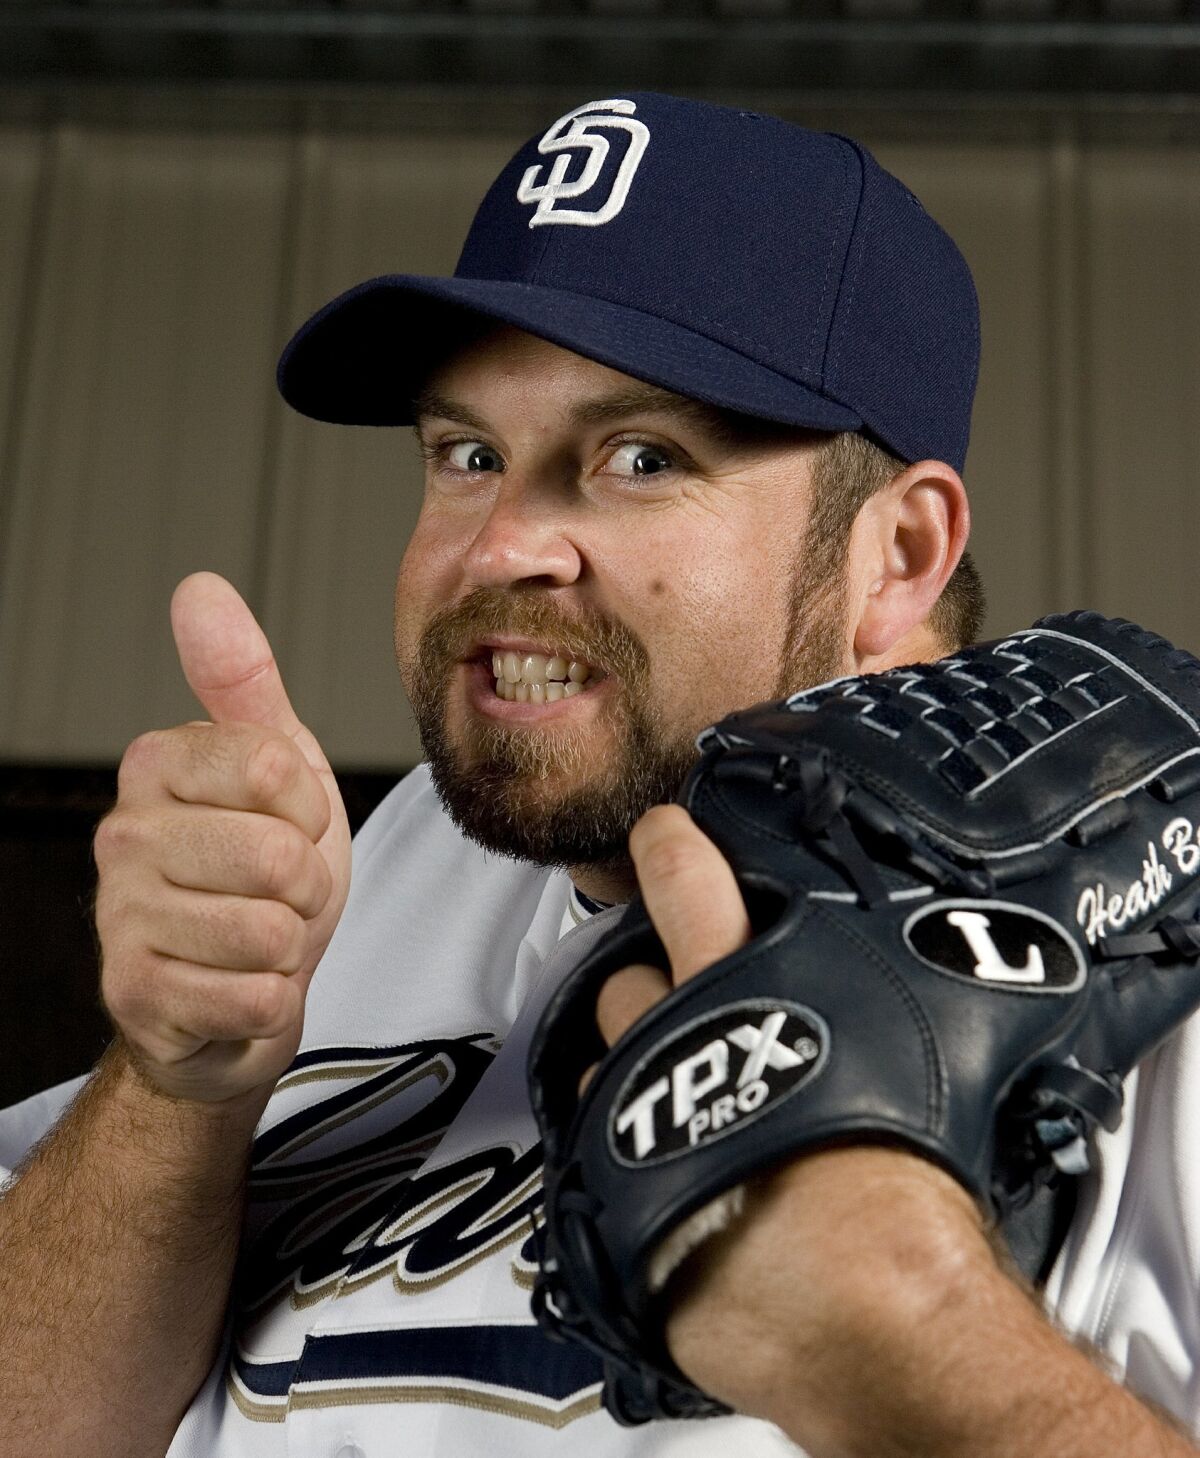 Even at spring training, Padres All-Star closer Heath Bell is having fun and saying what’s on his mind. — Earnie Grafton / Union-Tribune